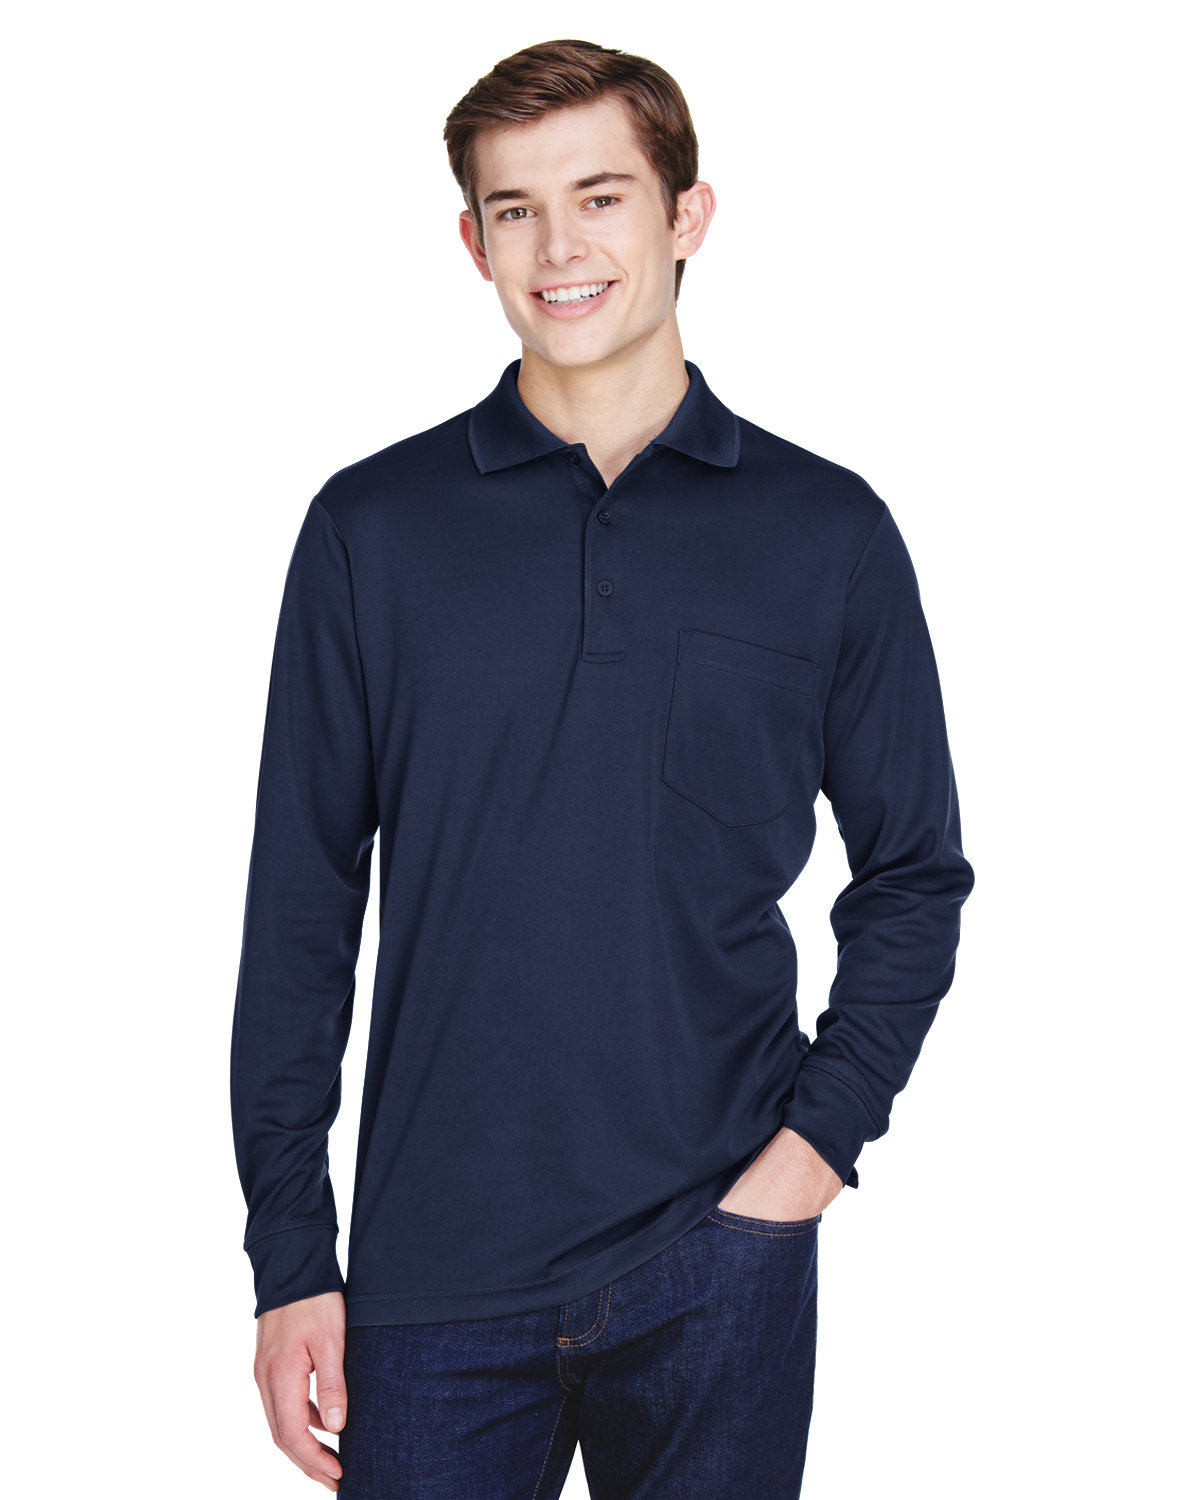 Core365 Adult Pinnacle Performance Long-Sleeve Piqué Polo with Pocket CLASSIC NAVY 